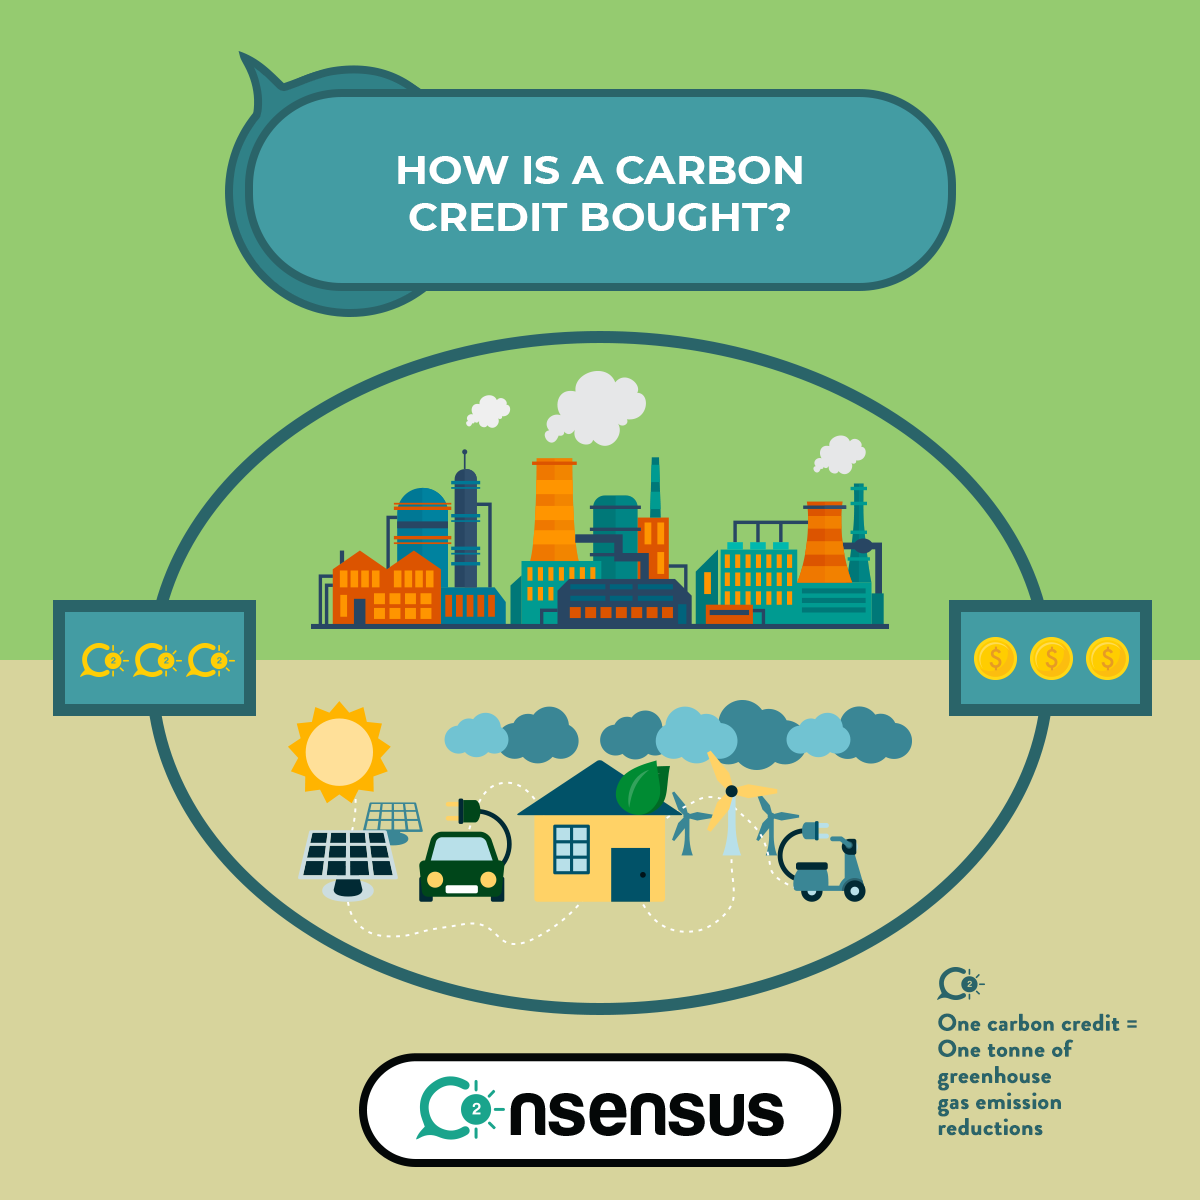 carbon credit bought